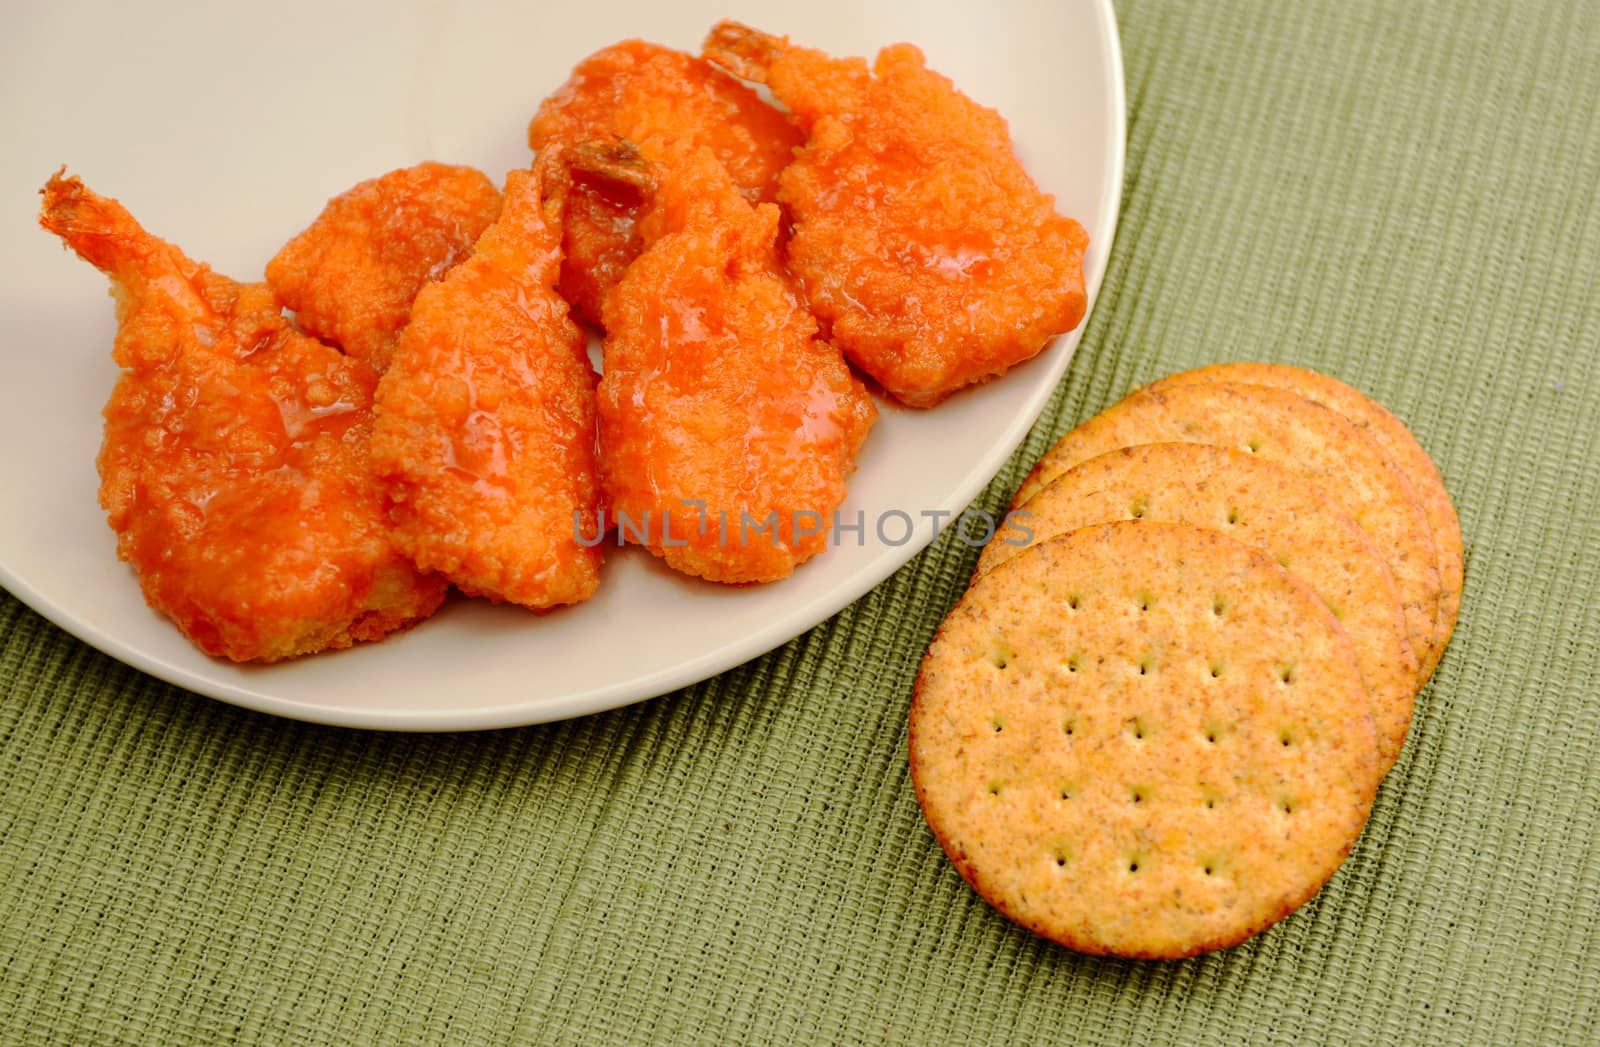 spicy fried shrimp and crackers by ftlaudgirl